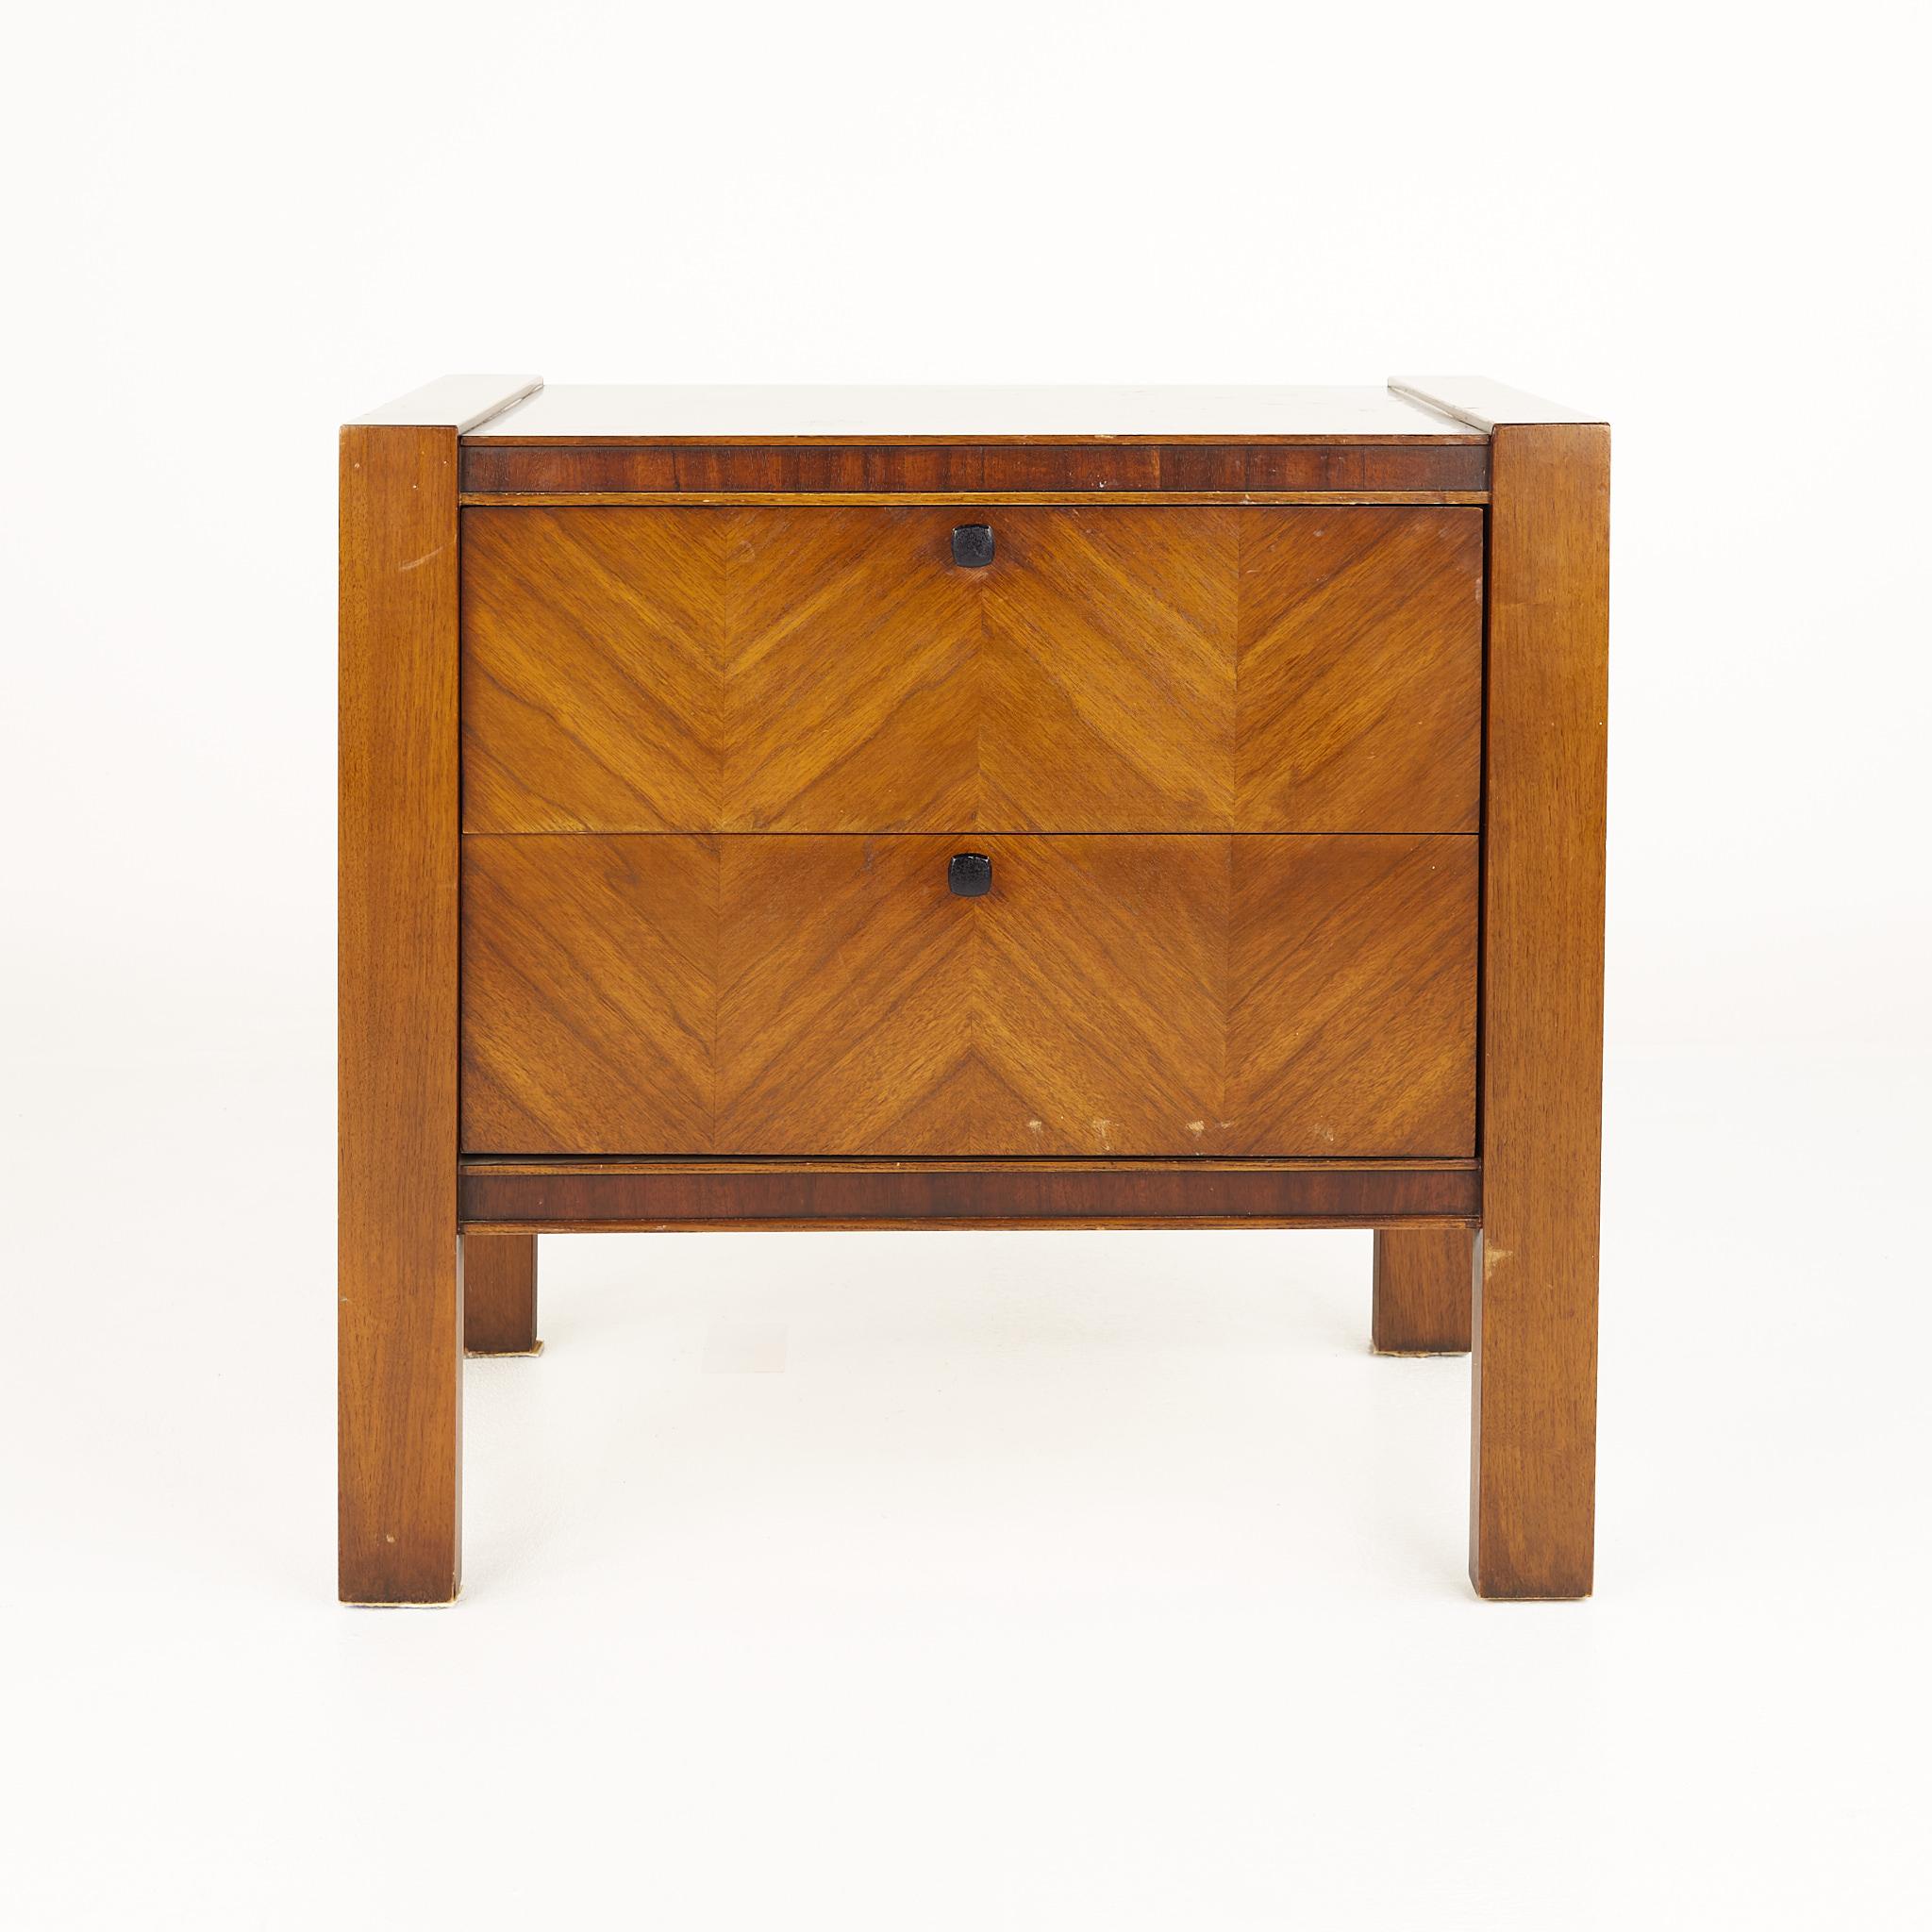 United Tiki Brutalist mid century walnut nightstand

This nightstand measures: 27 wide x 17.25 deep x 25.75 inches high

?All pieces of furniture can be had in what we call restored vintage condition. That means the piece is restored upon